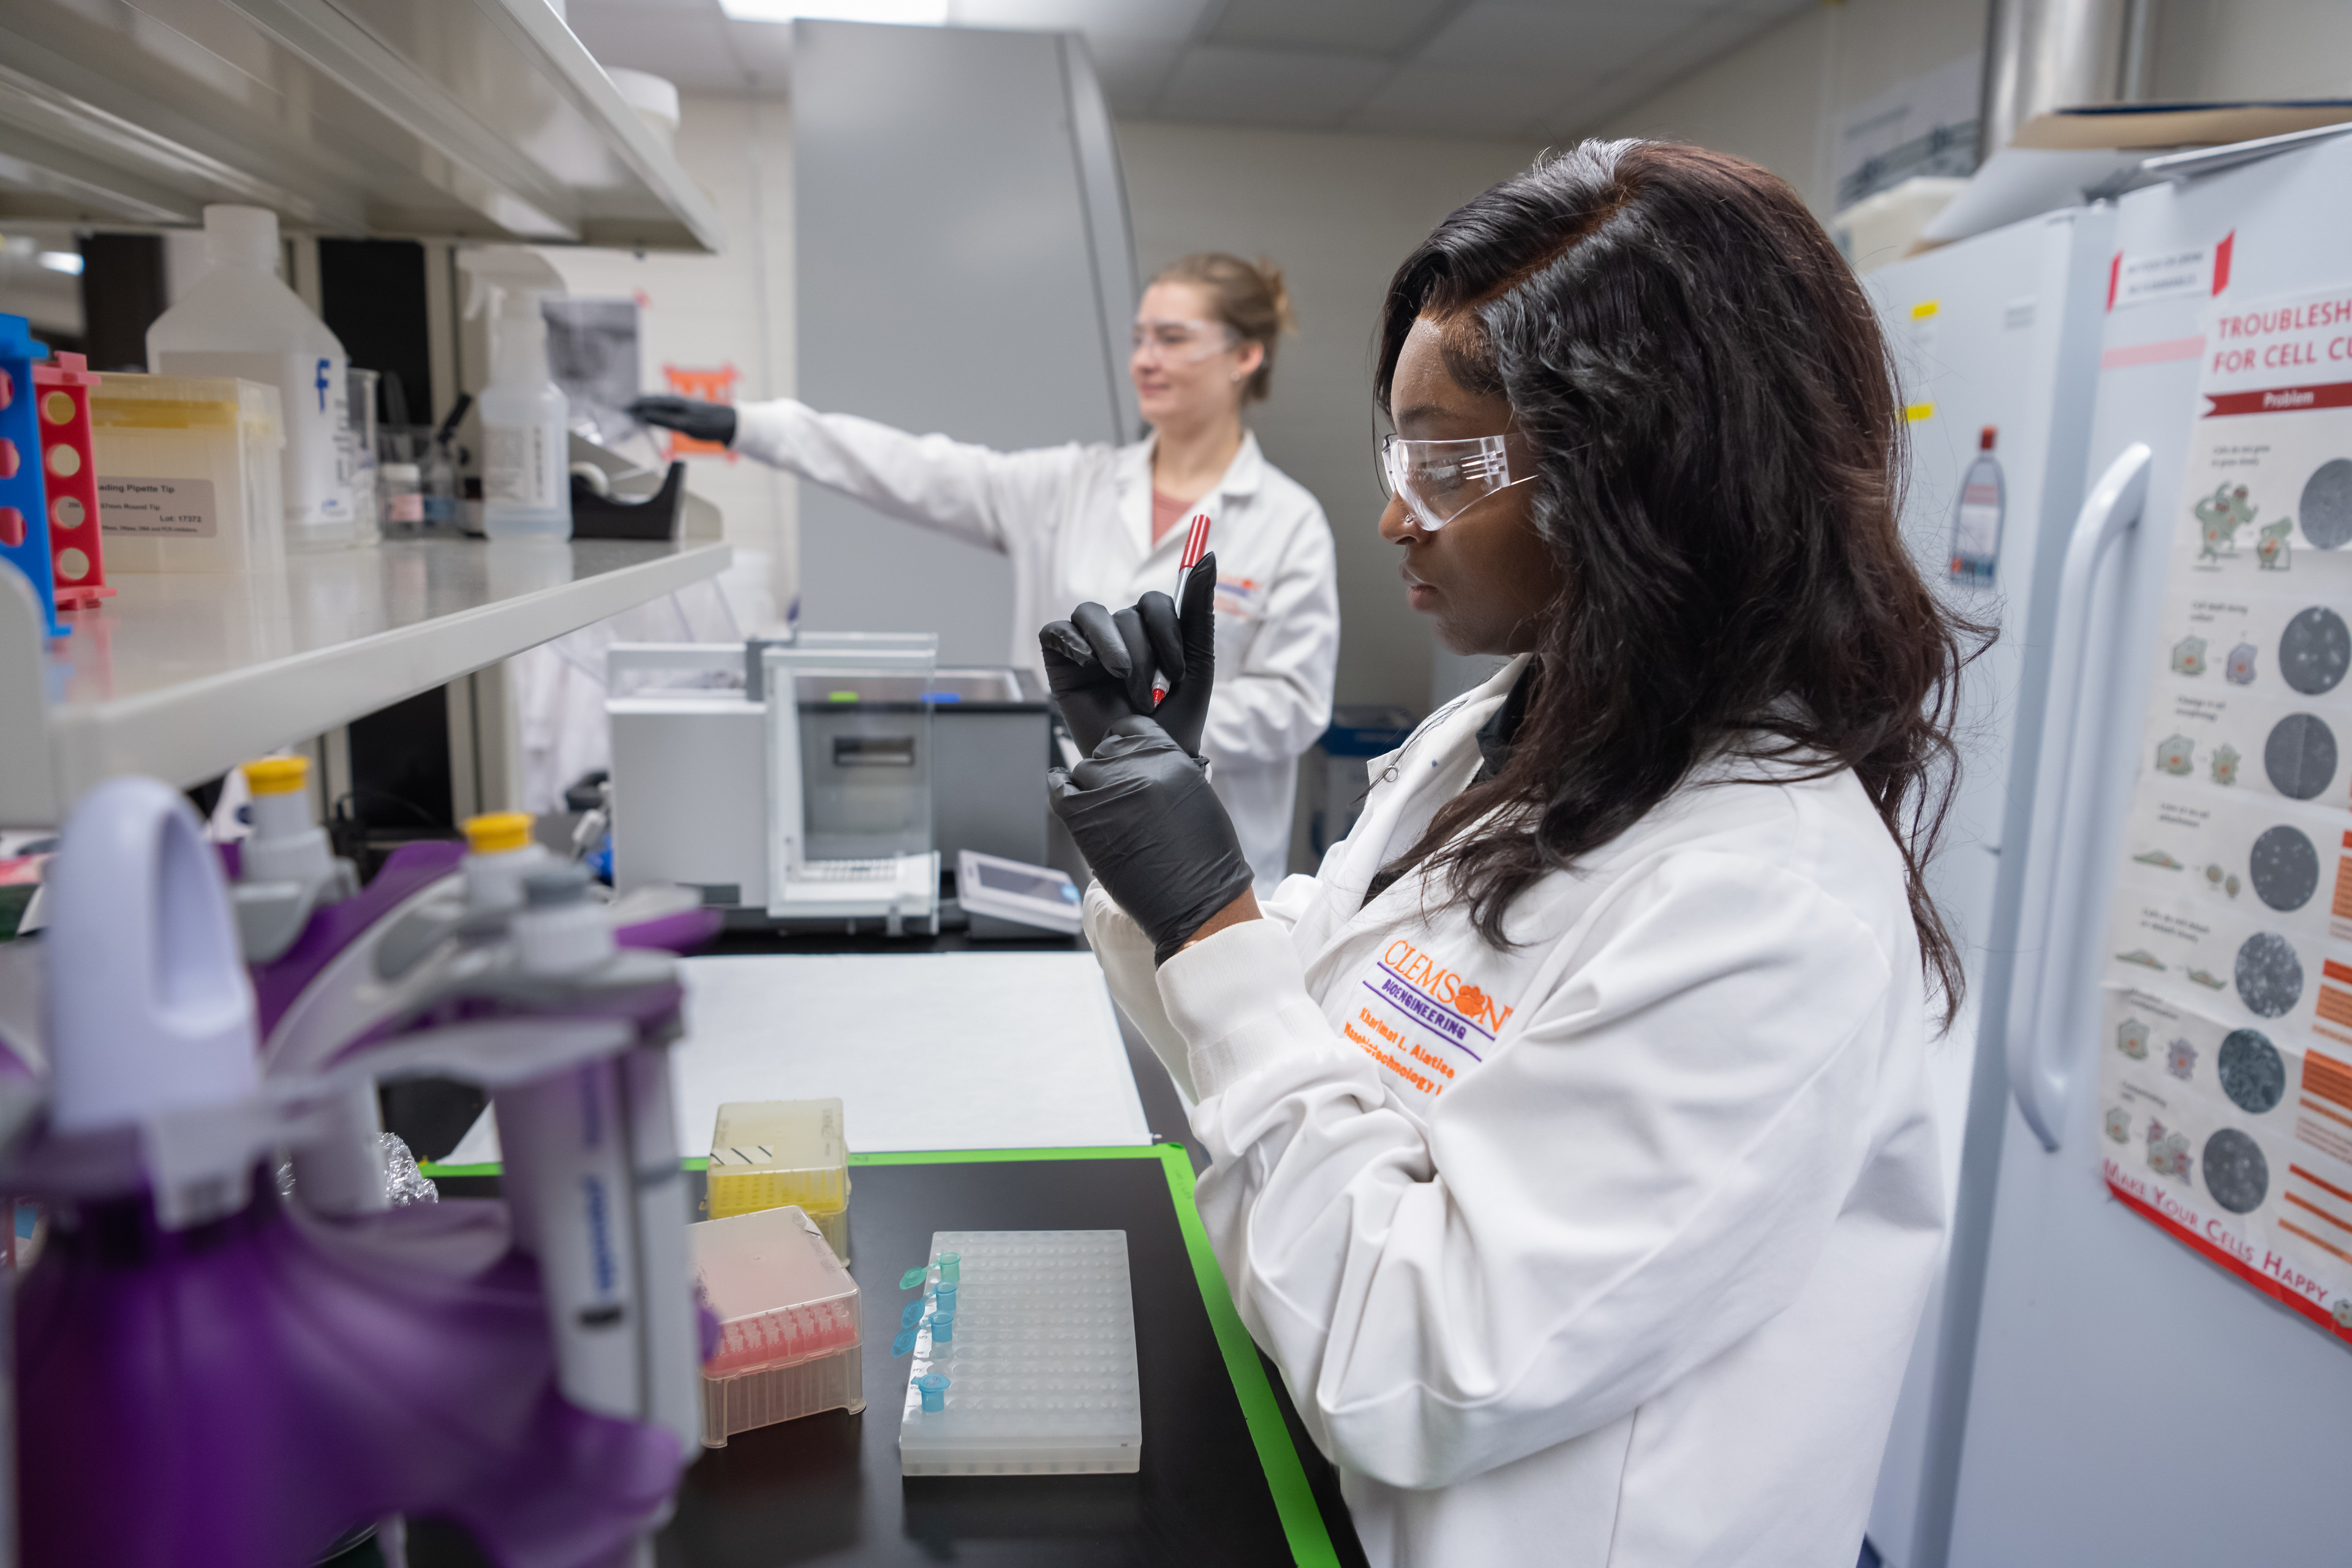 Bioengineering students working together in lab at Clemson